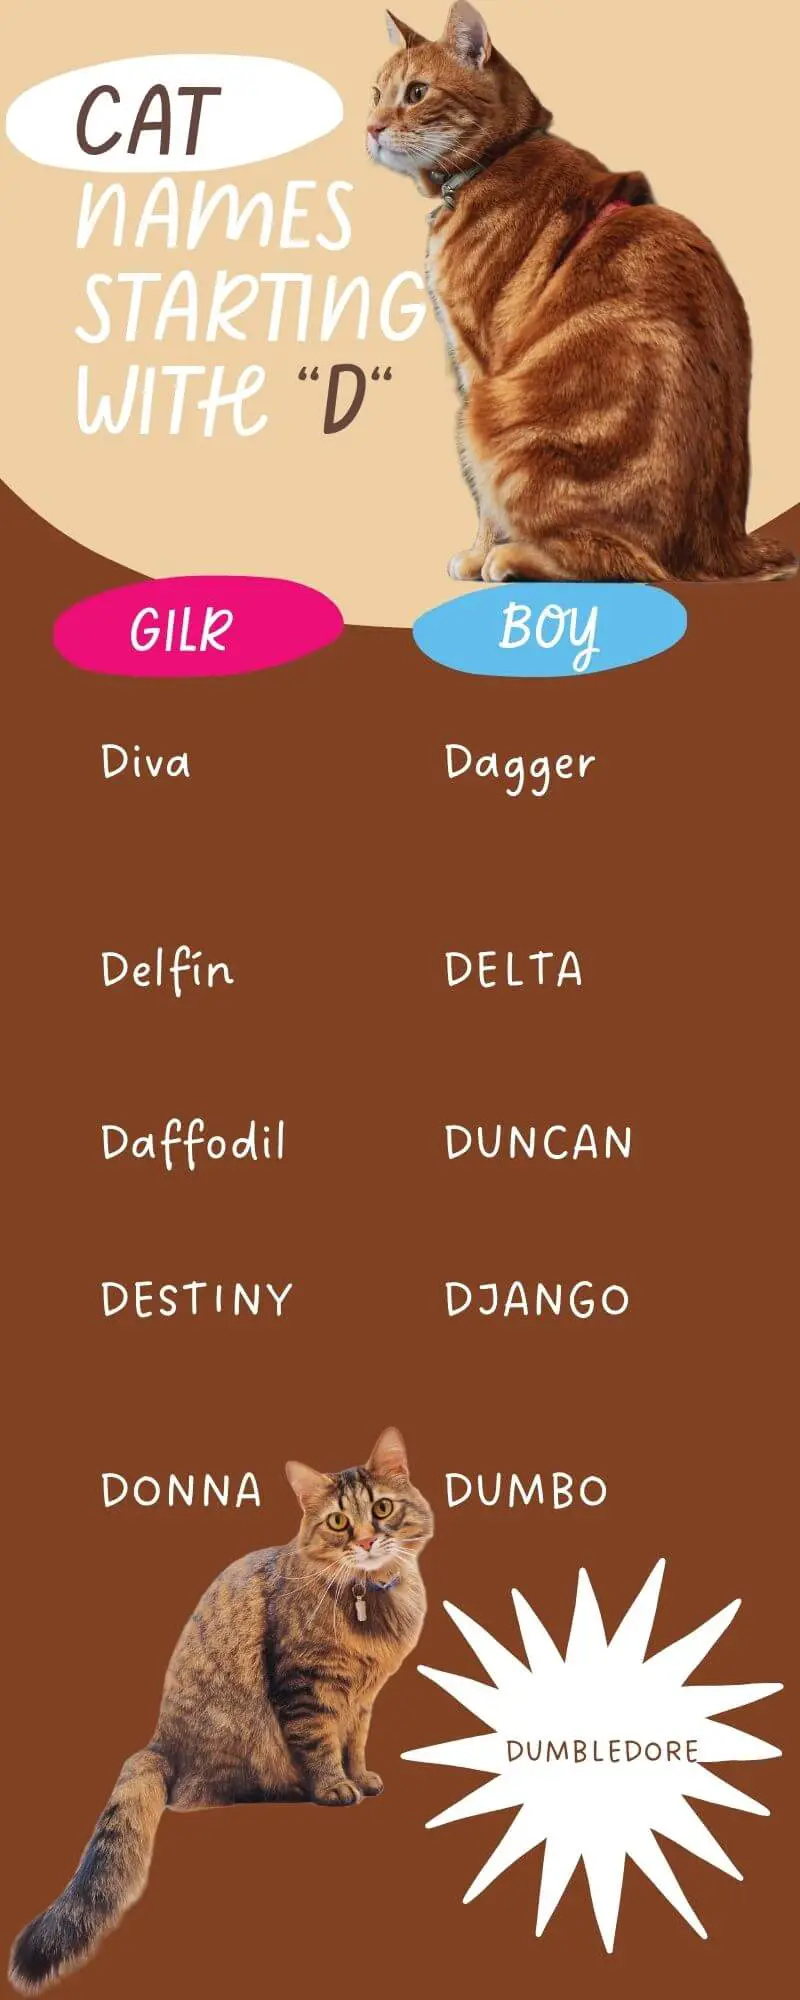 An Infographic showing  the list of 10 Cat Names Starting with D for male and female cats